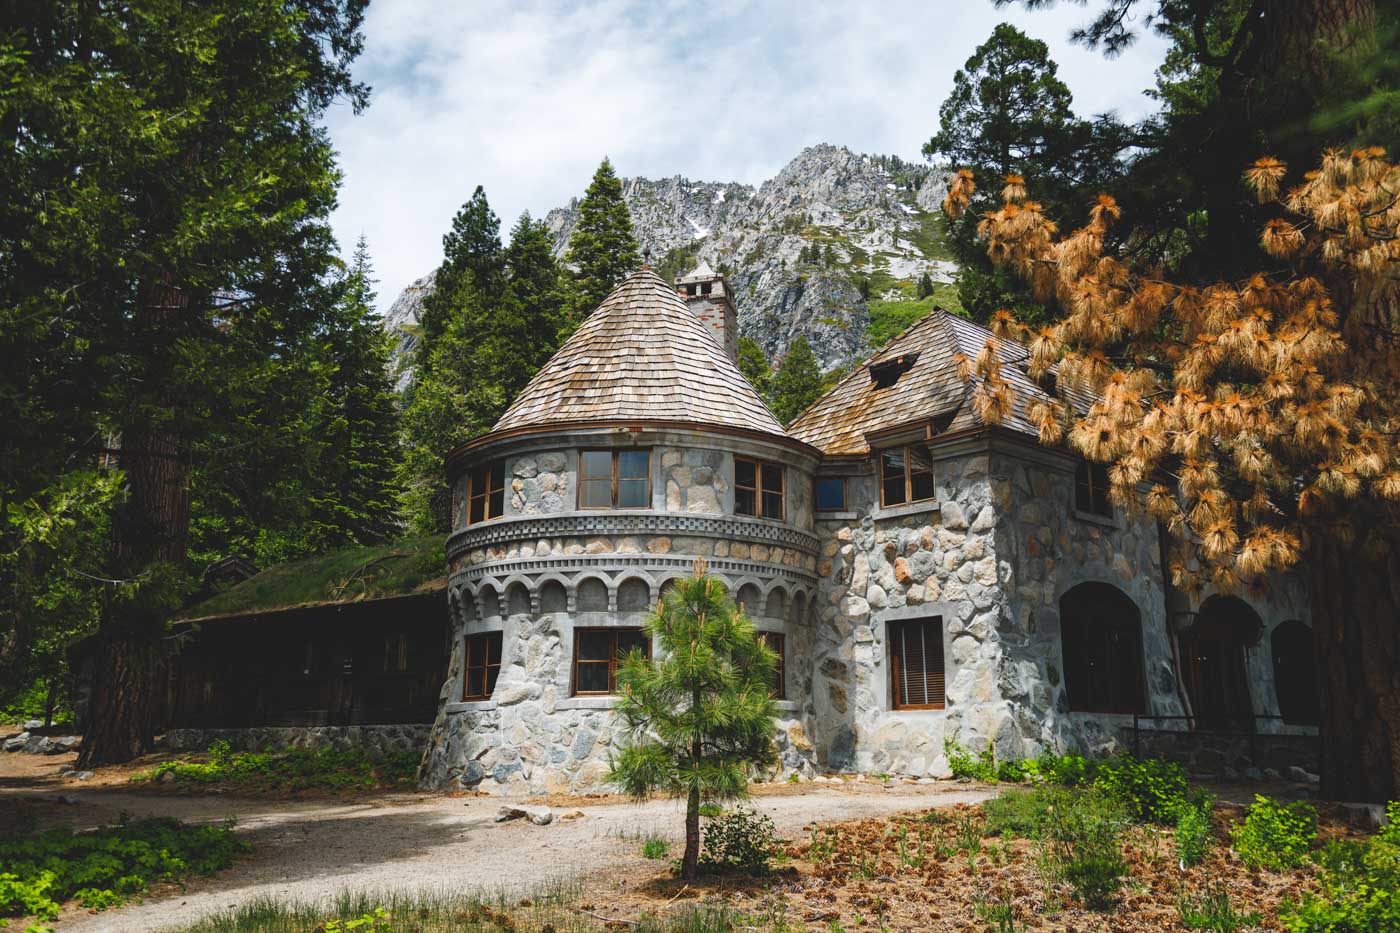 The stone Vikingsholm mansion build in the middle of the forest with a backdrop of mountains.